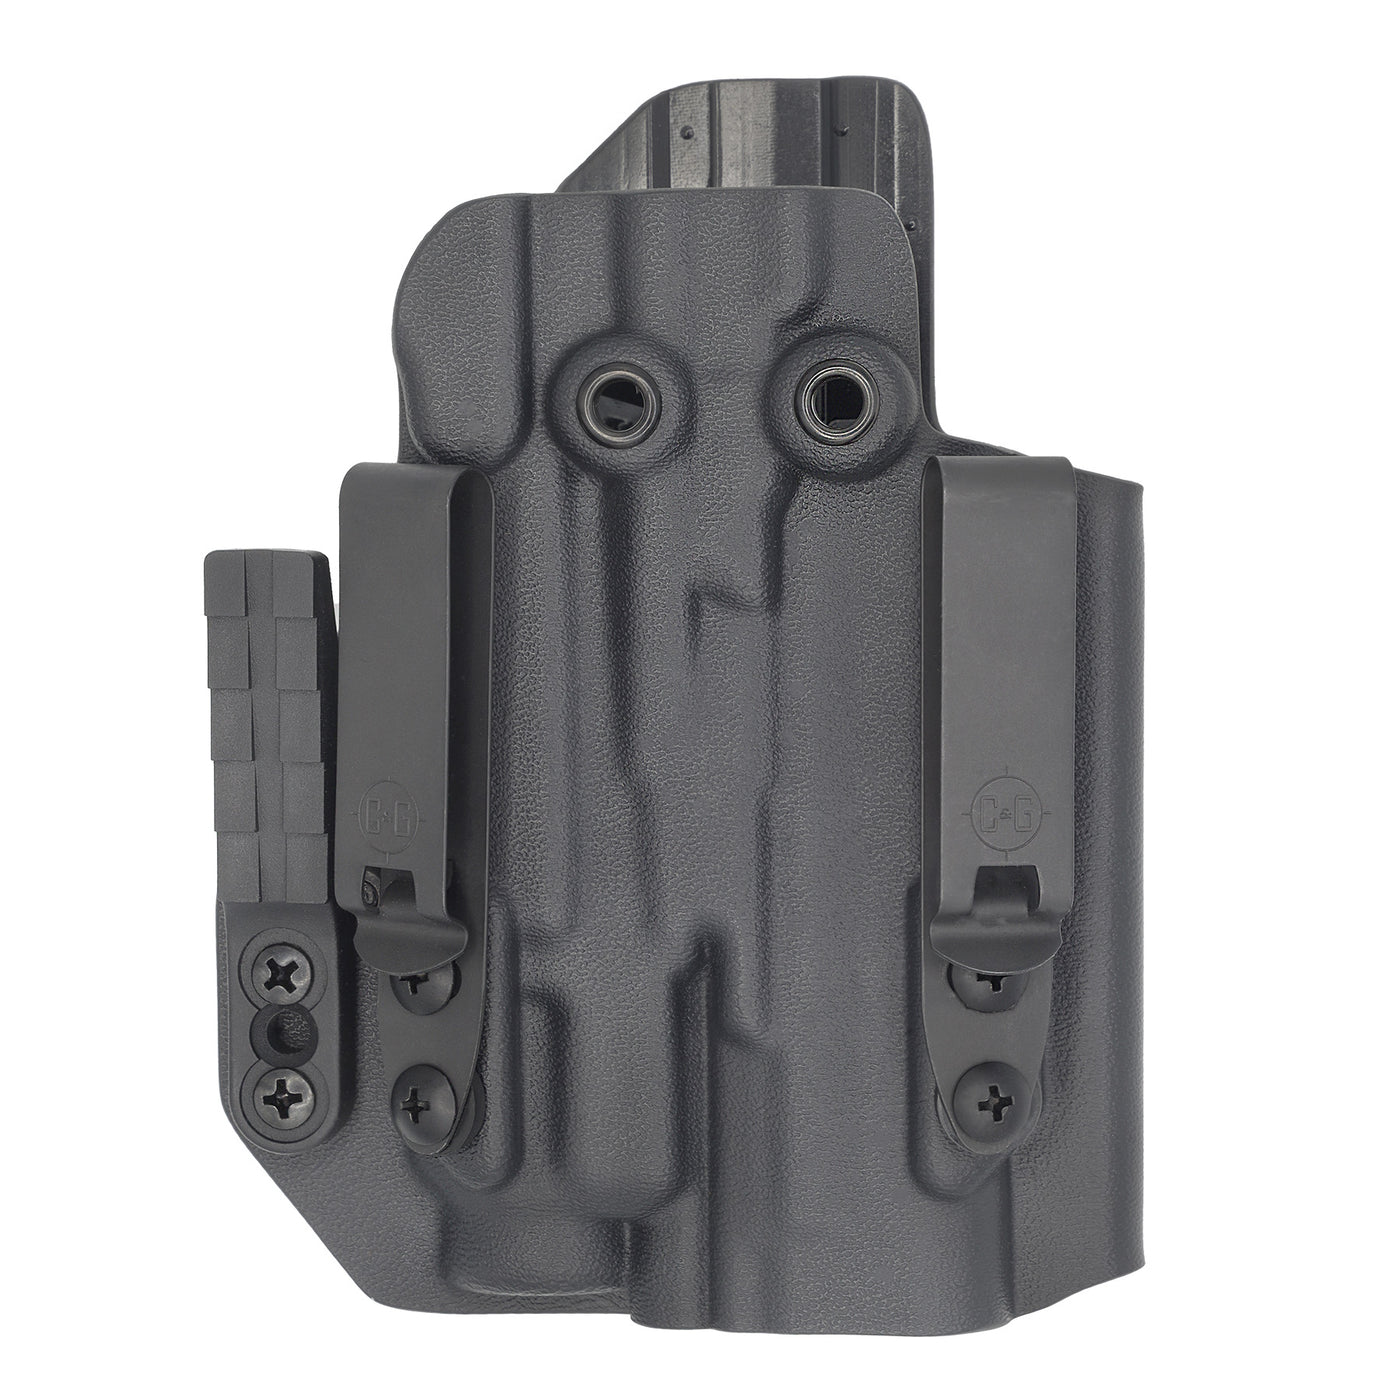 C&G Holsters custom IWB ALPHA UPGRADE Tactical CZ P07/9 Streamlight tlr7/a